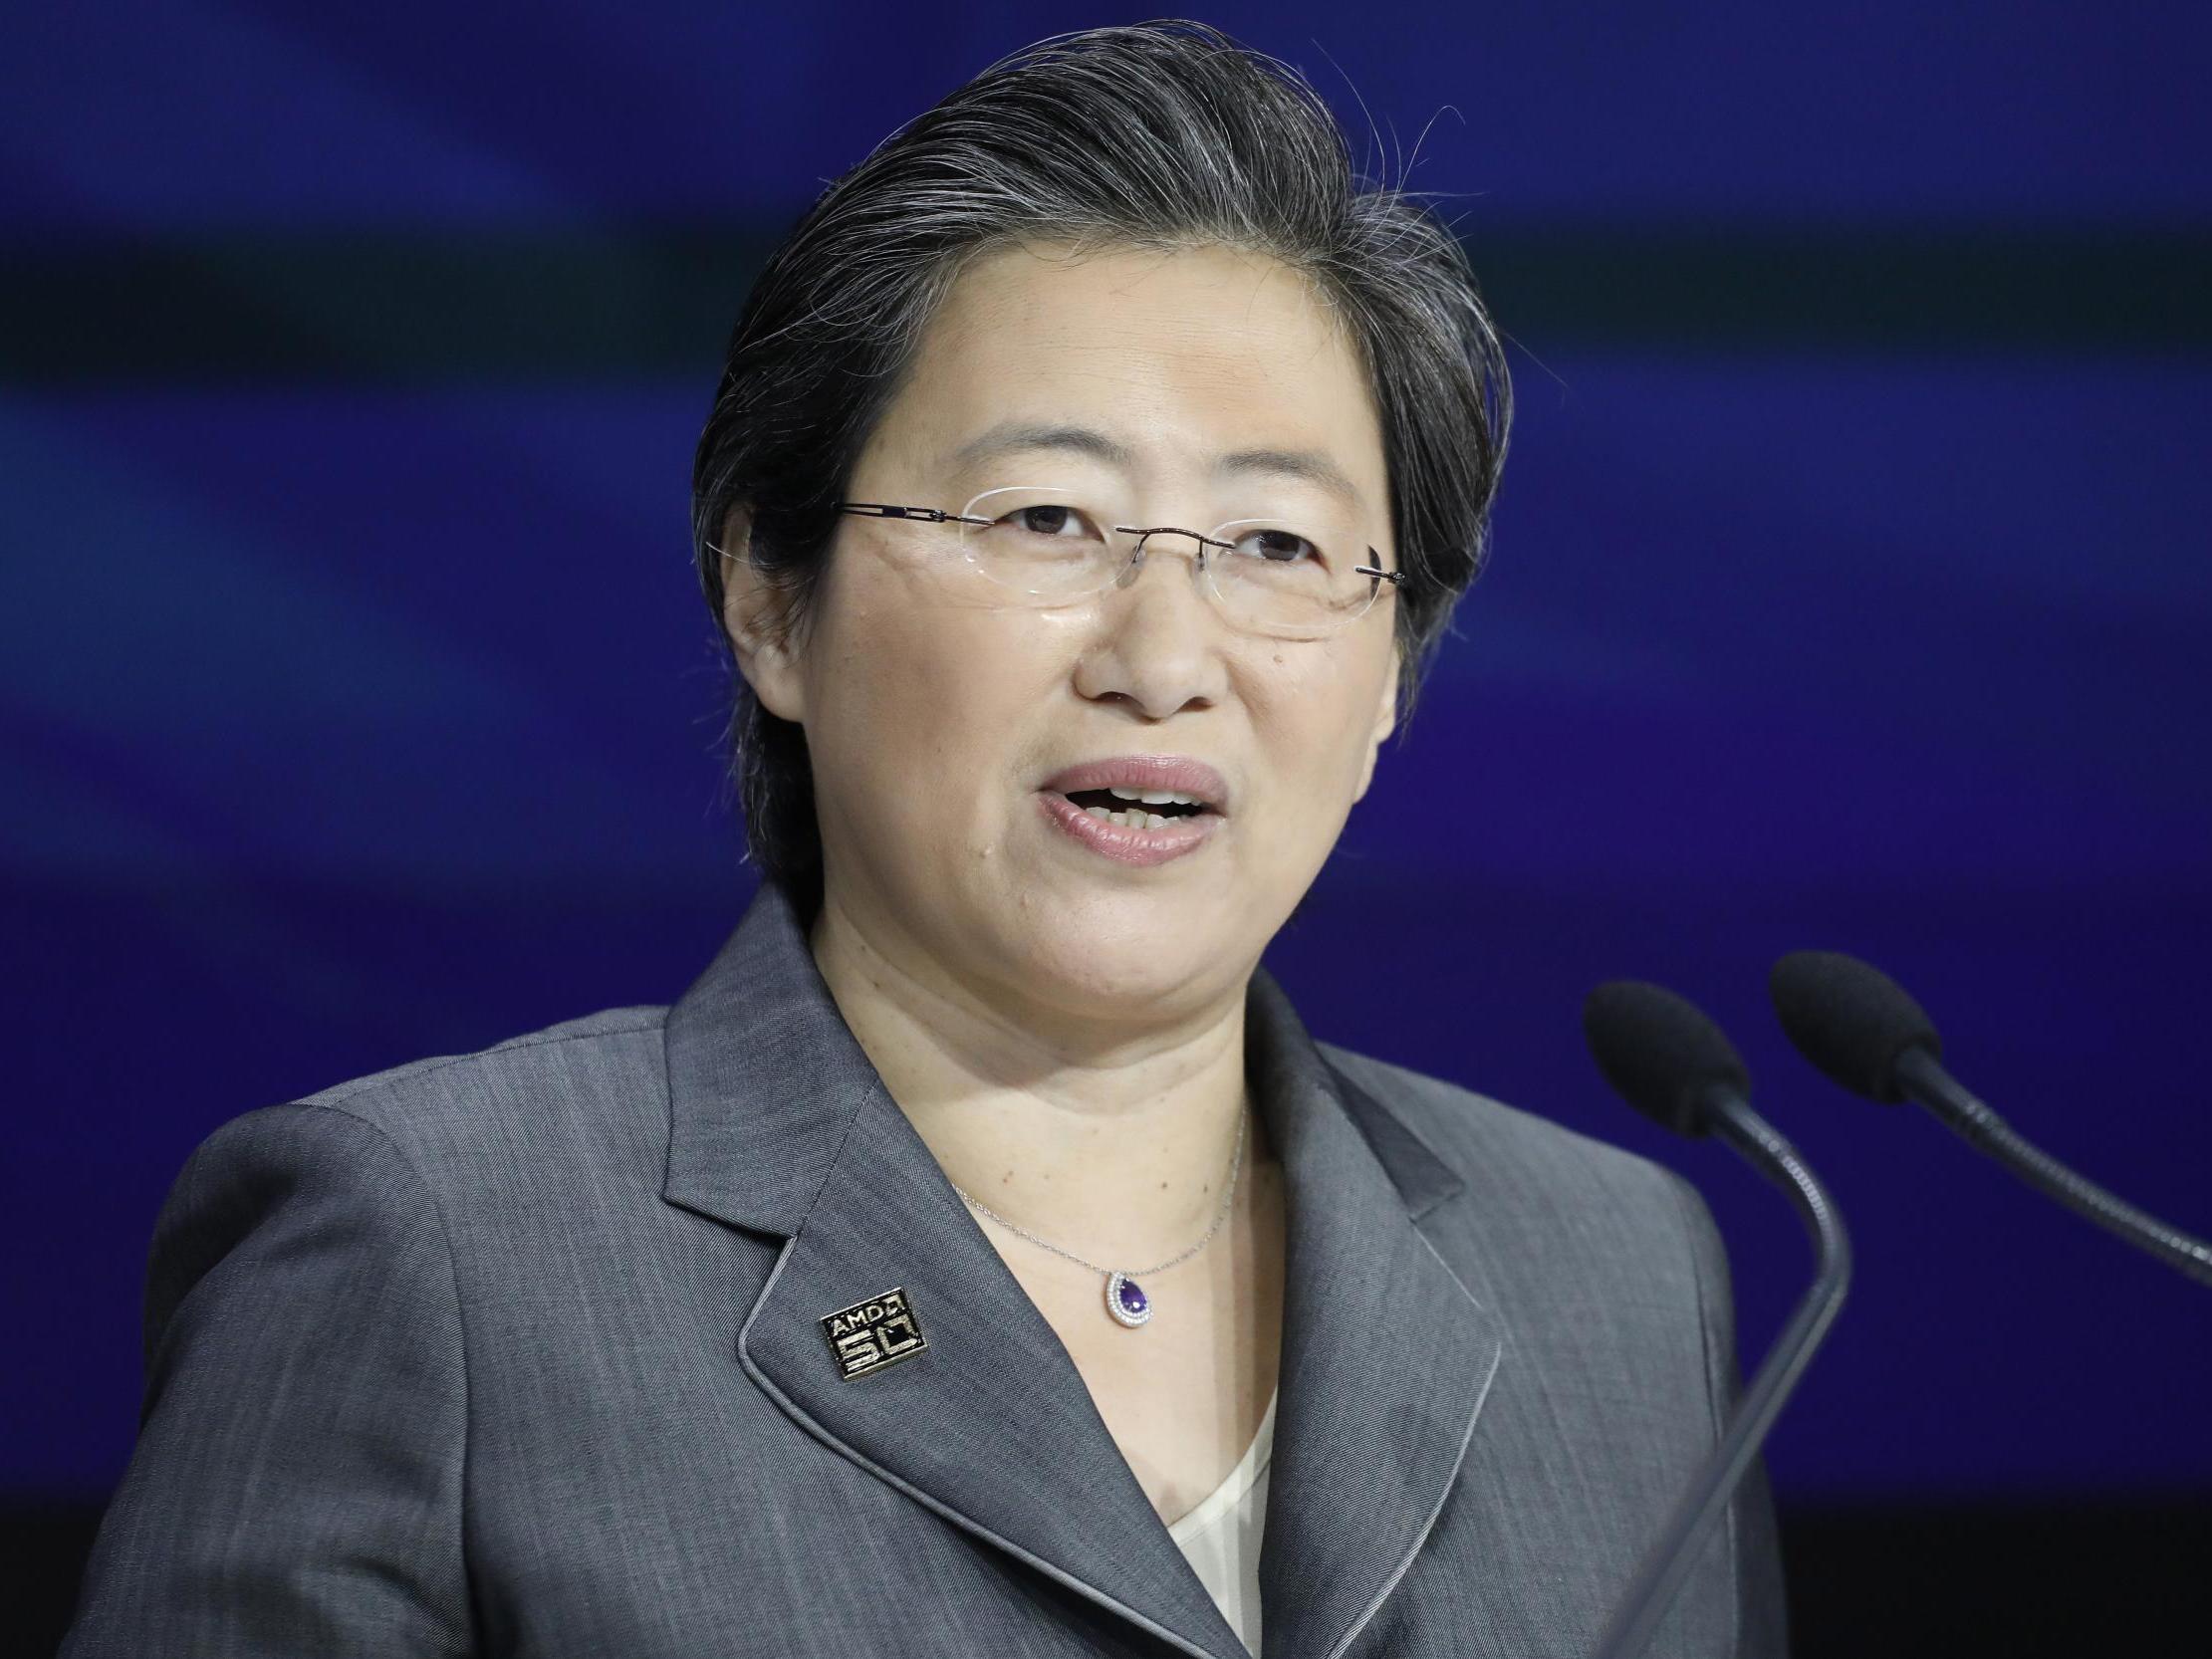 Lisa Su, president and CEO of AMD, attends the opening bell at Nasdaq, in New York